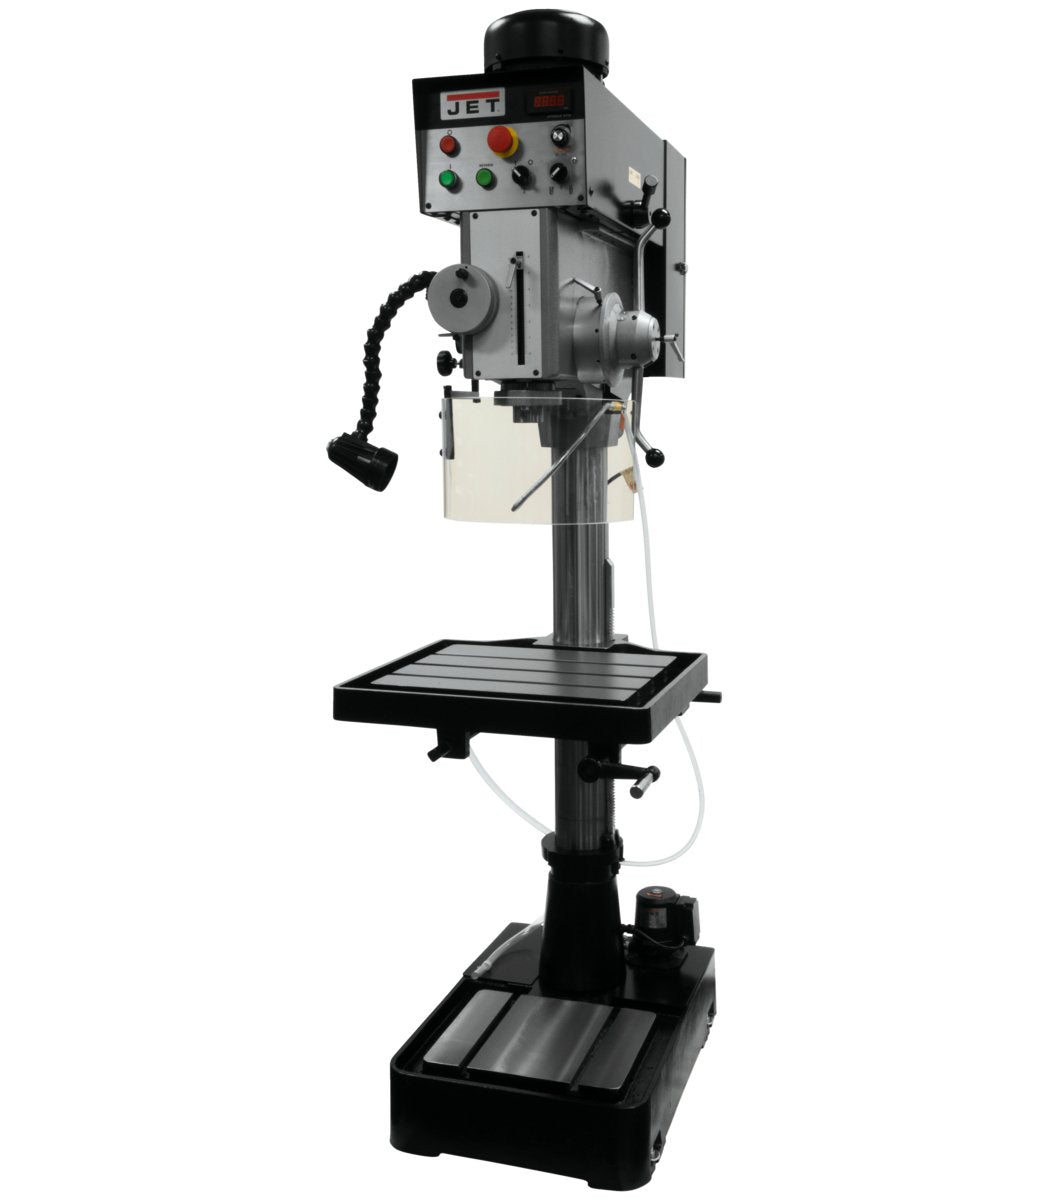 20" EVS Geared Head Drill Press With Tapping & Power Downfeed - 460V - Diamond Tool Store